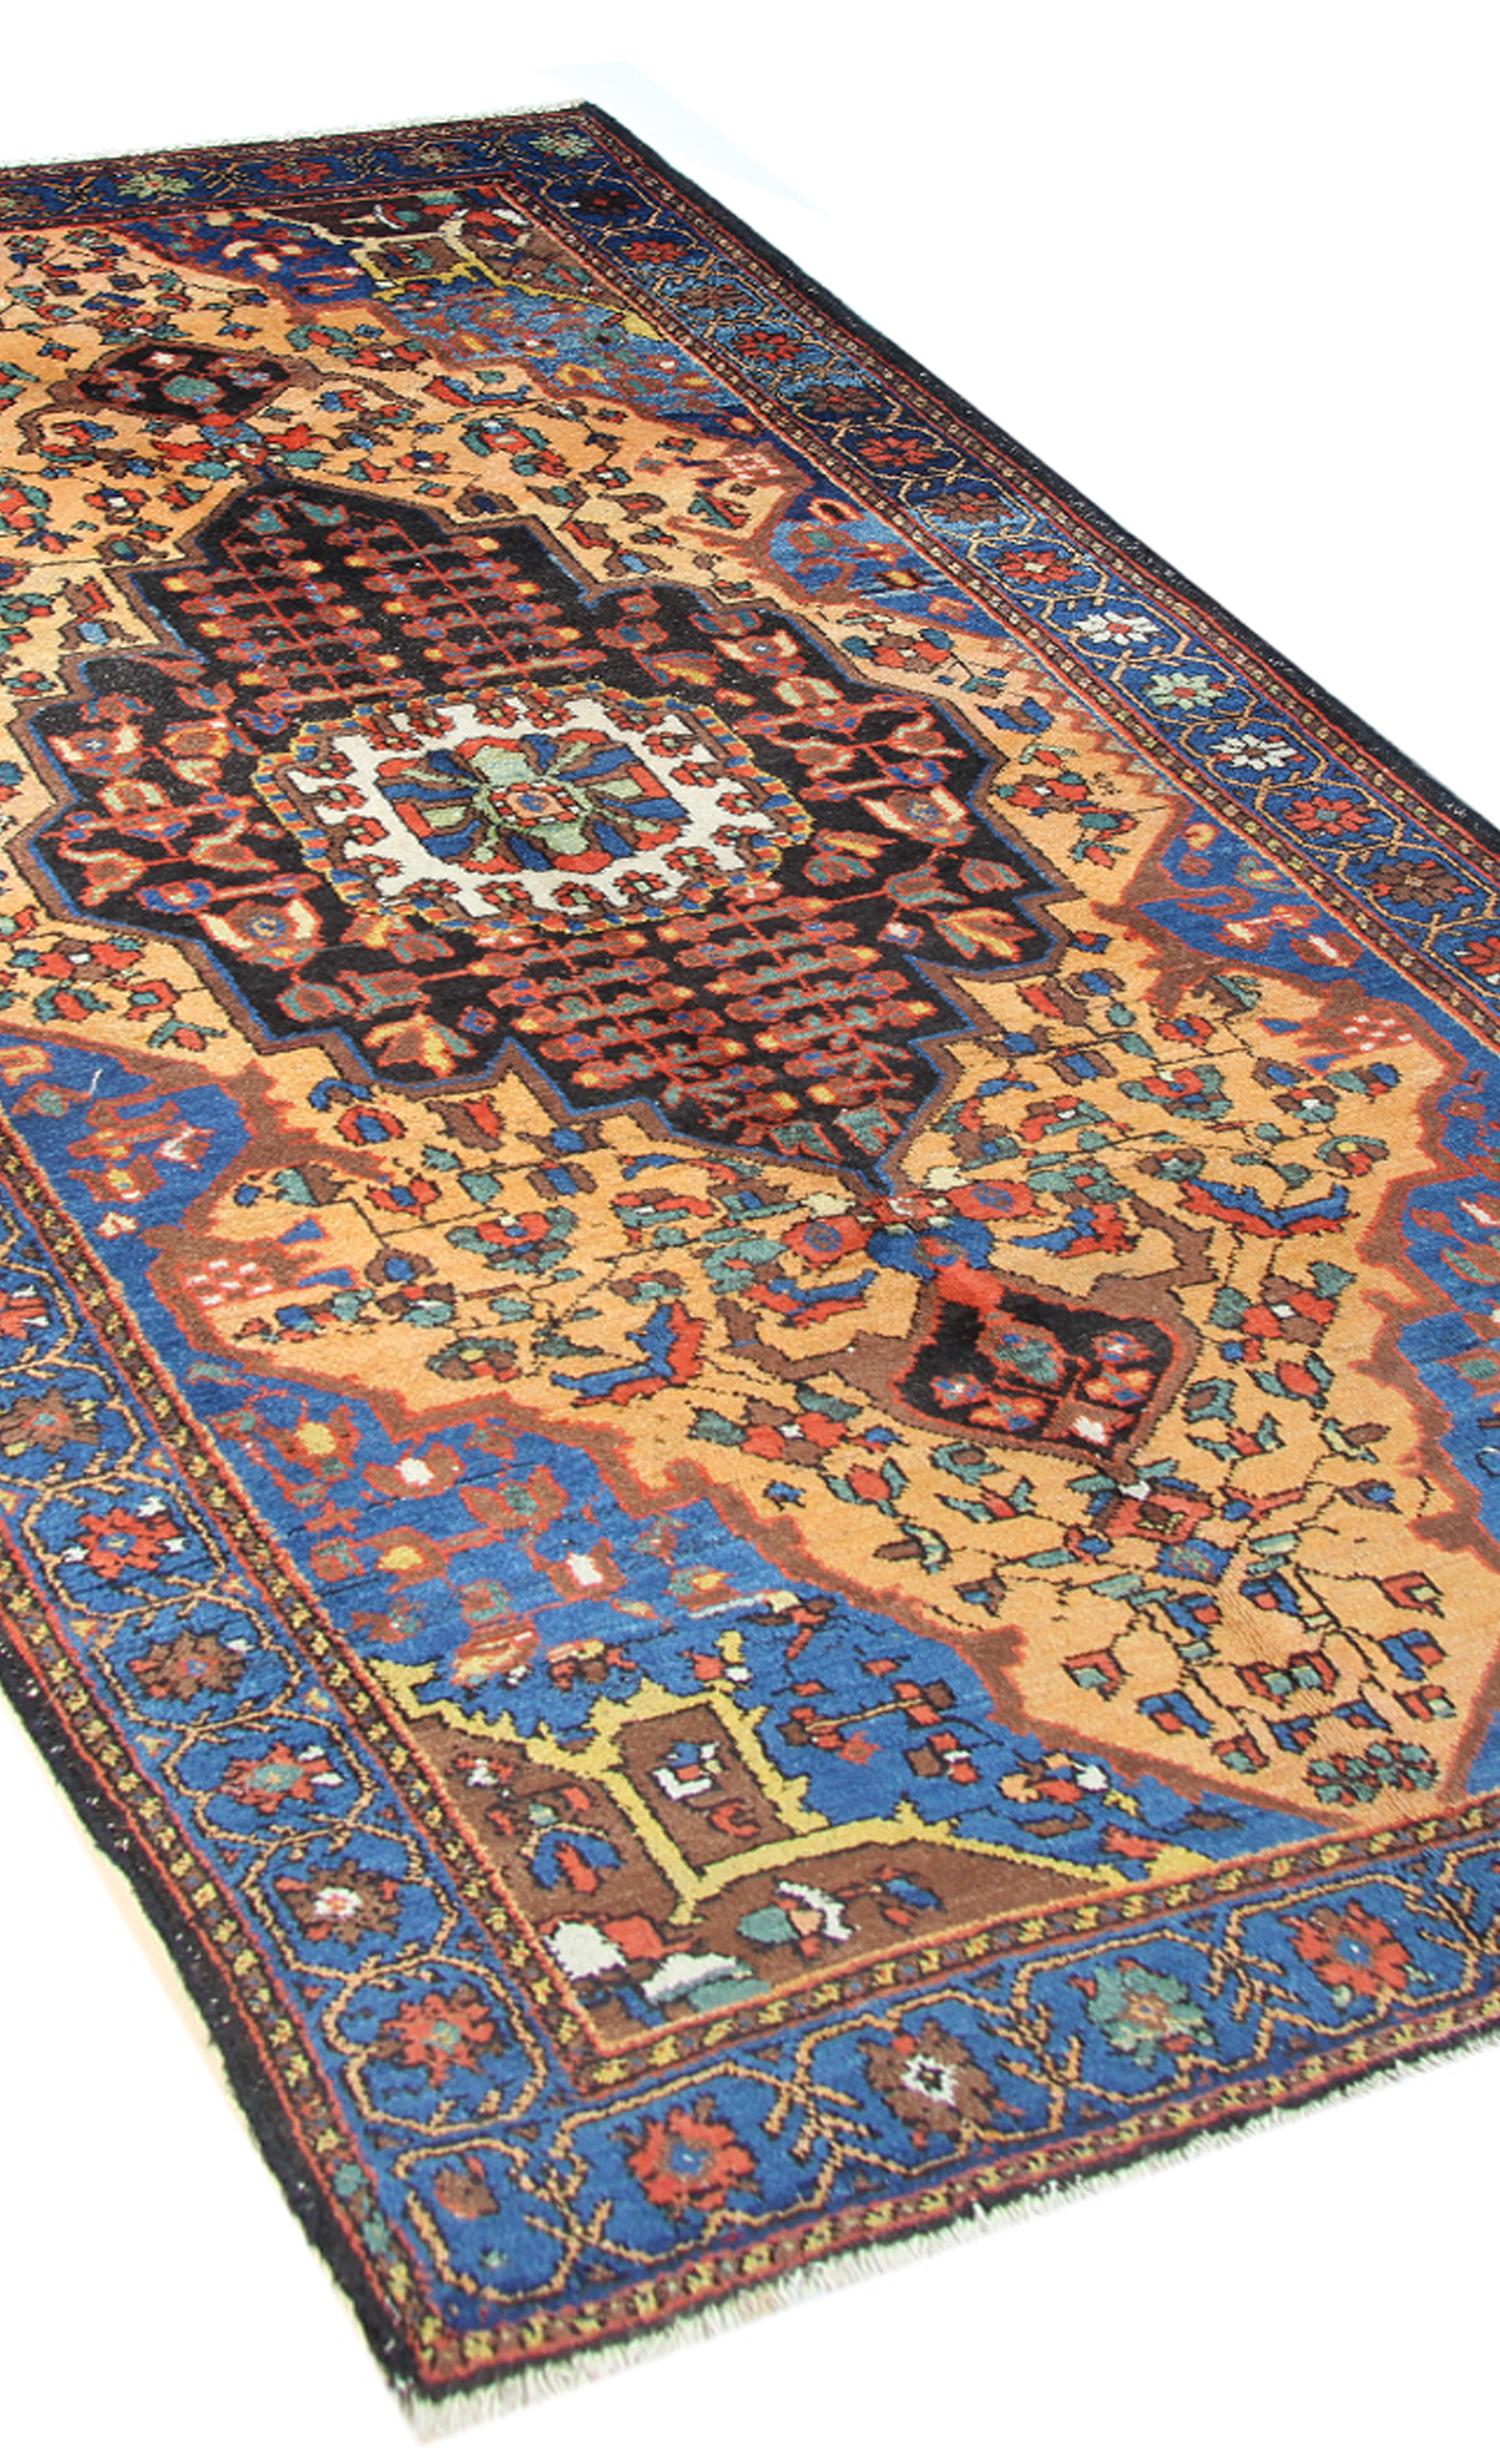 This beautiful Antique area rug is in excellent condition with a highly detailed central medallion design woven on a gold background colour which complements the navy blue colour in the four corners of the rug and the medallion. Suitable for use as